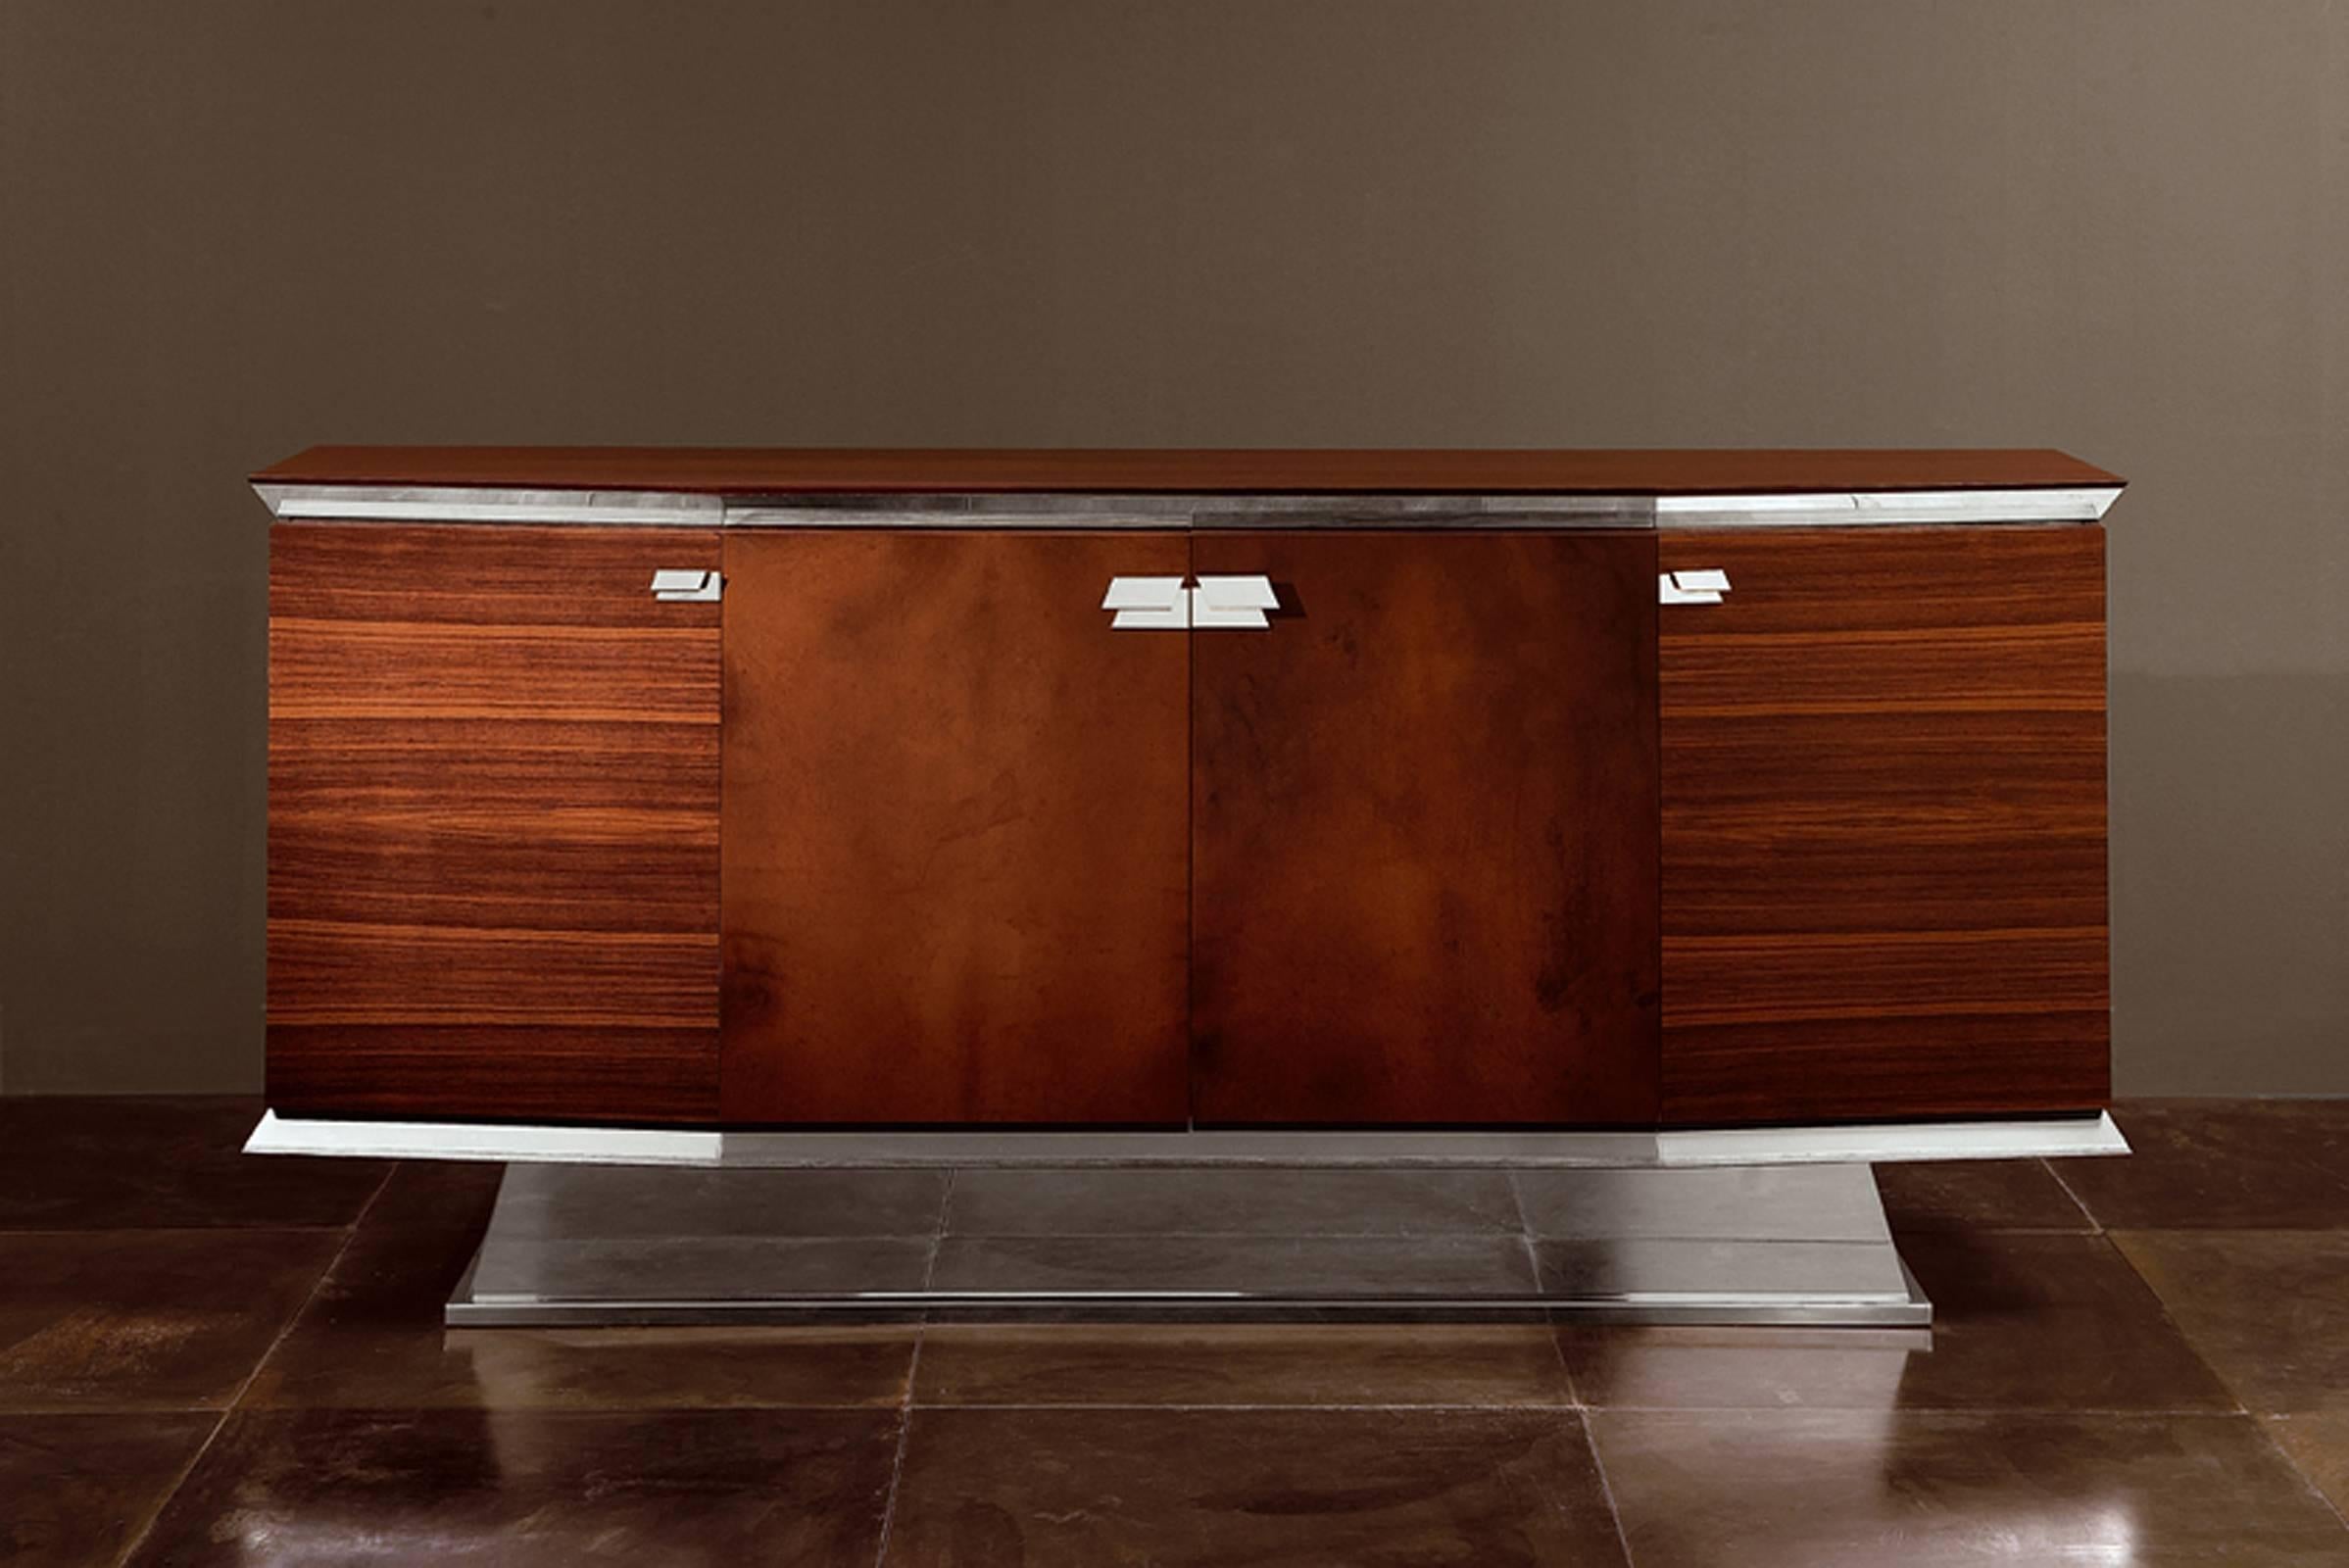 Sideboard Virginia with brushed steel base.
Top and structure in rosewood.
Doors with leather Category B.
In option leather exists in Category C and D.
Base available in bronze.
Virginia is available in different customed sizes.
